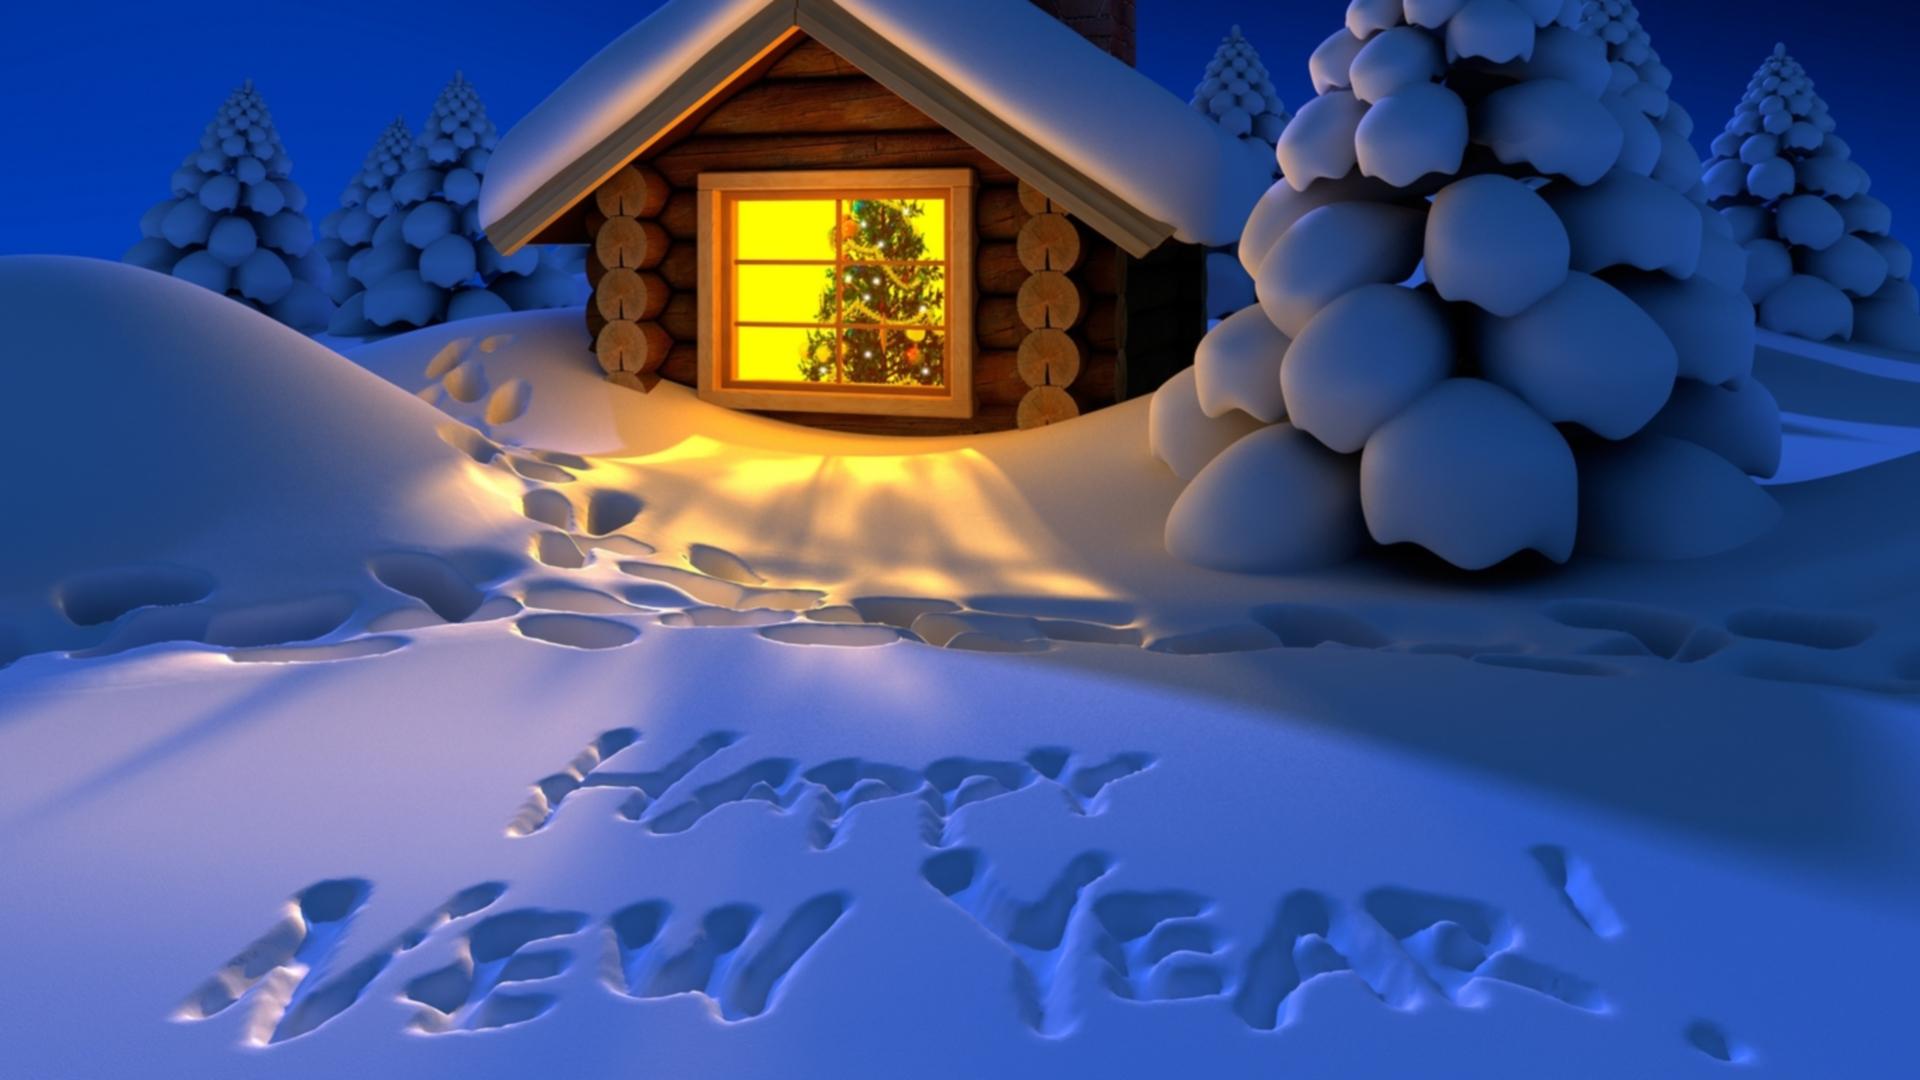 Best New Year HD Wallpaper, Awesome Picture Image Pc